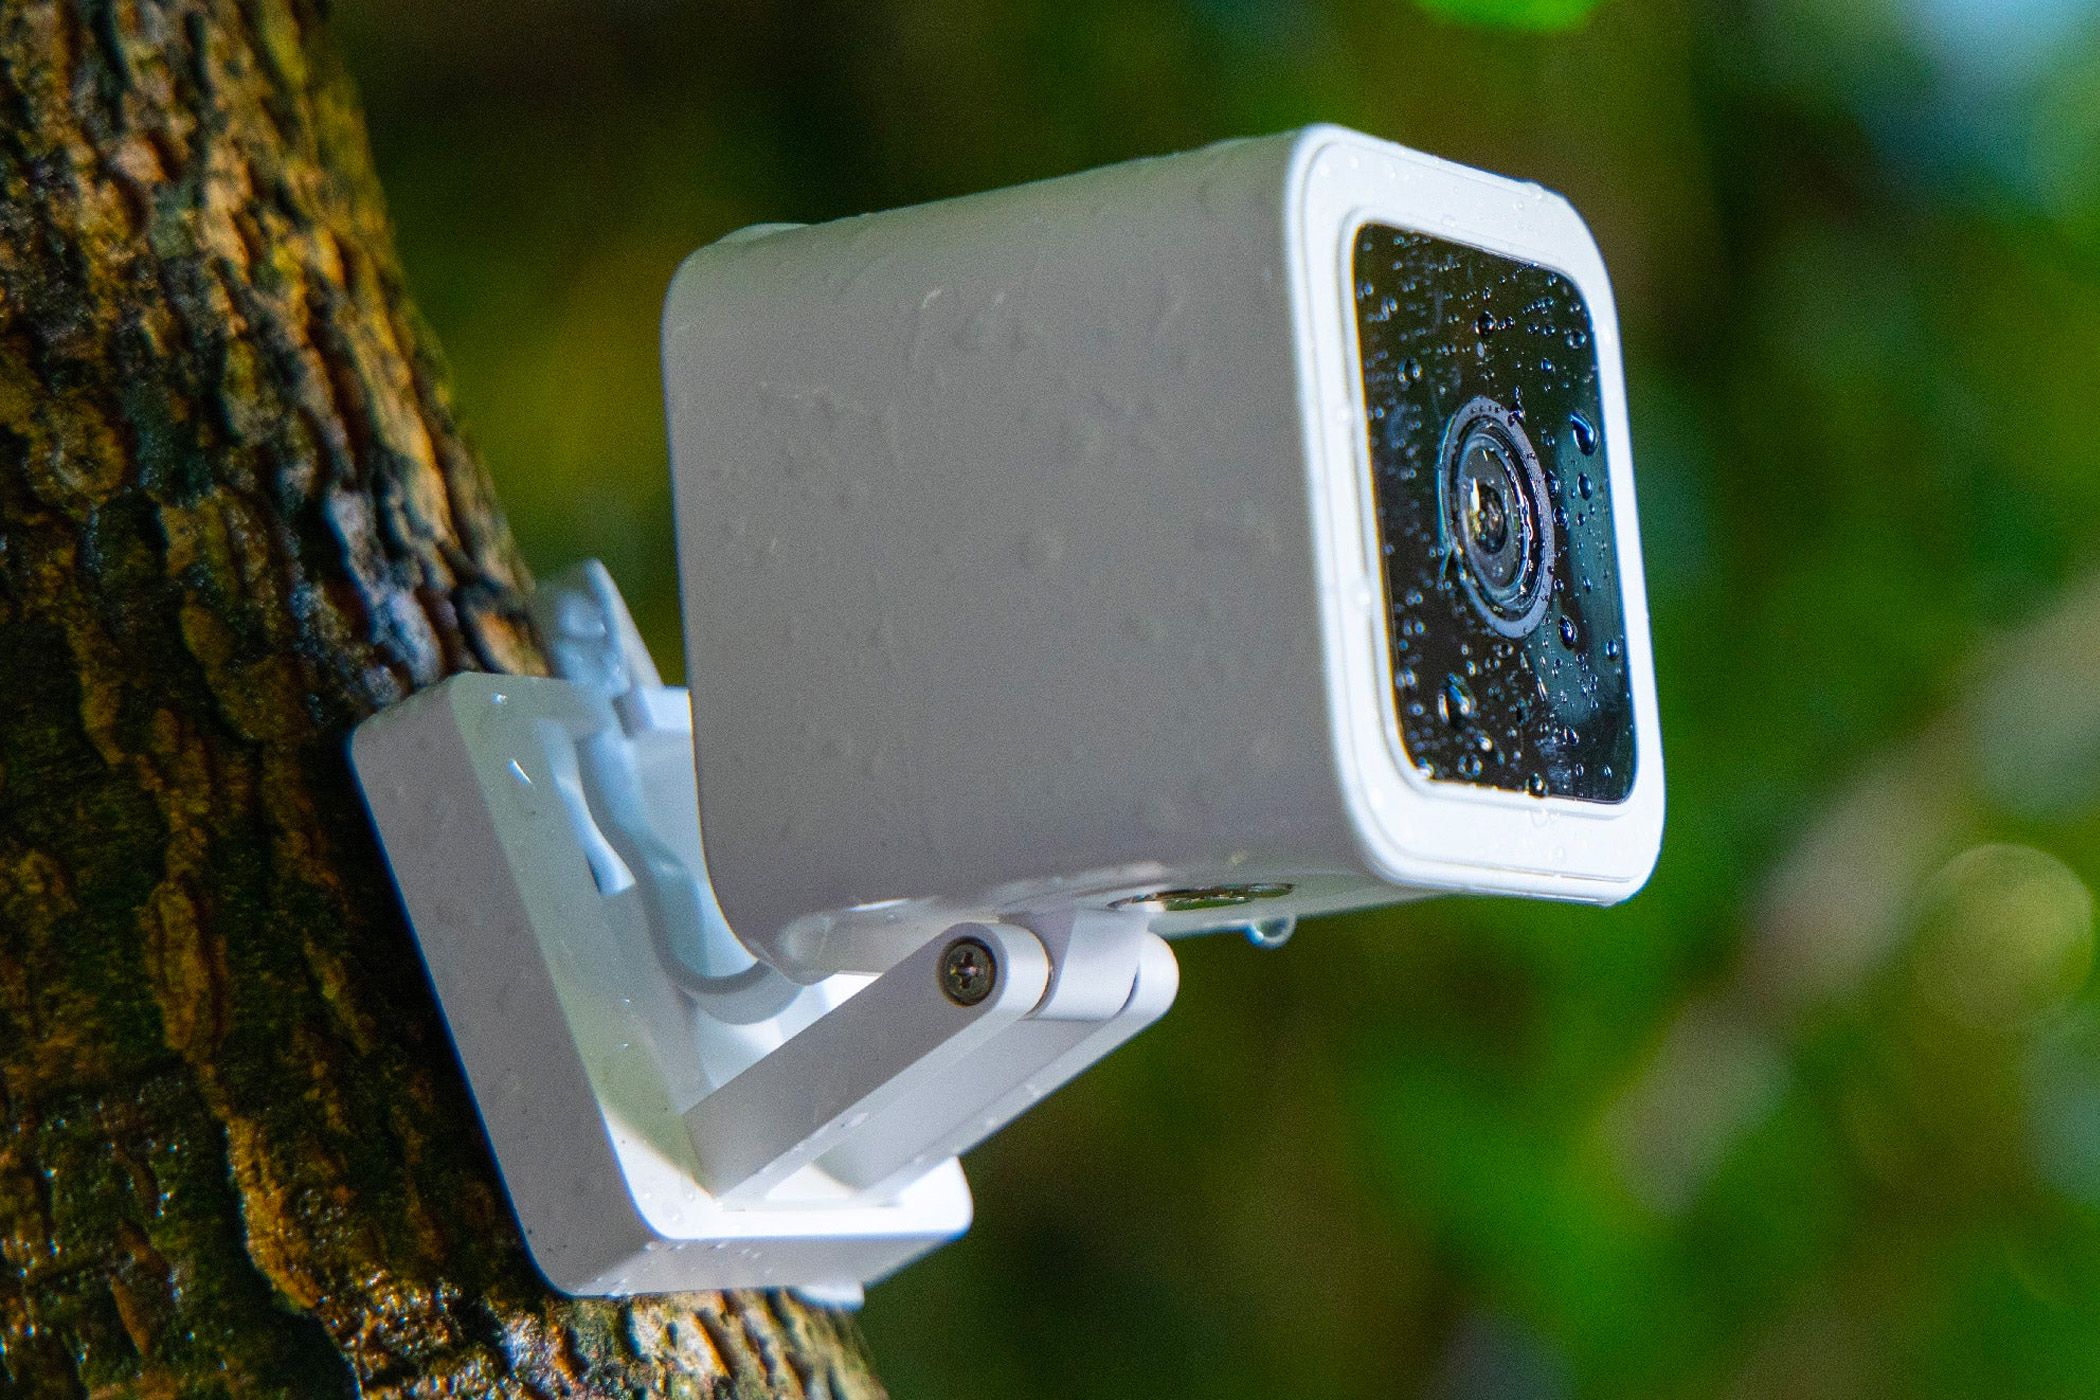 Wyze security camera mounted on a tree trunk with water droplets on the lens.